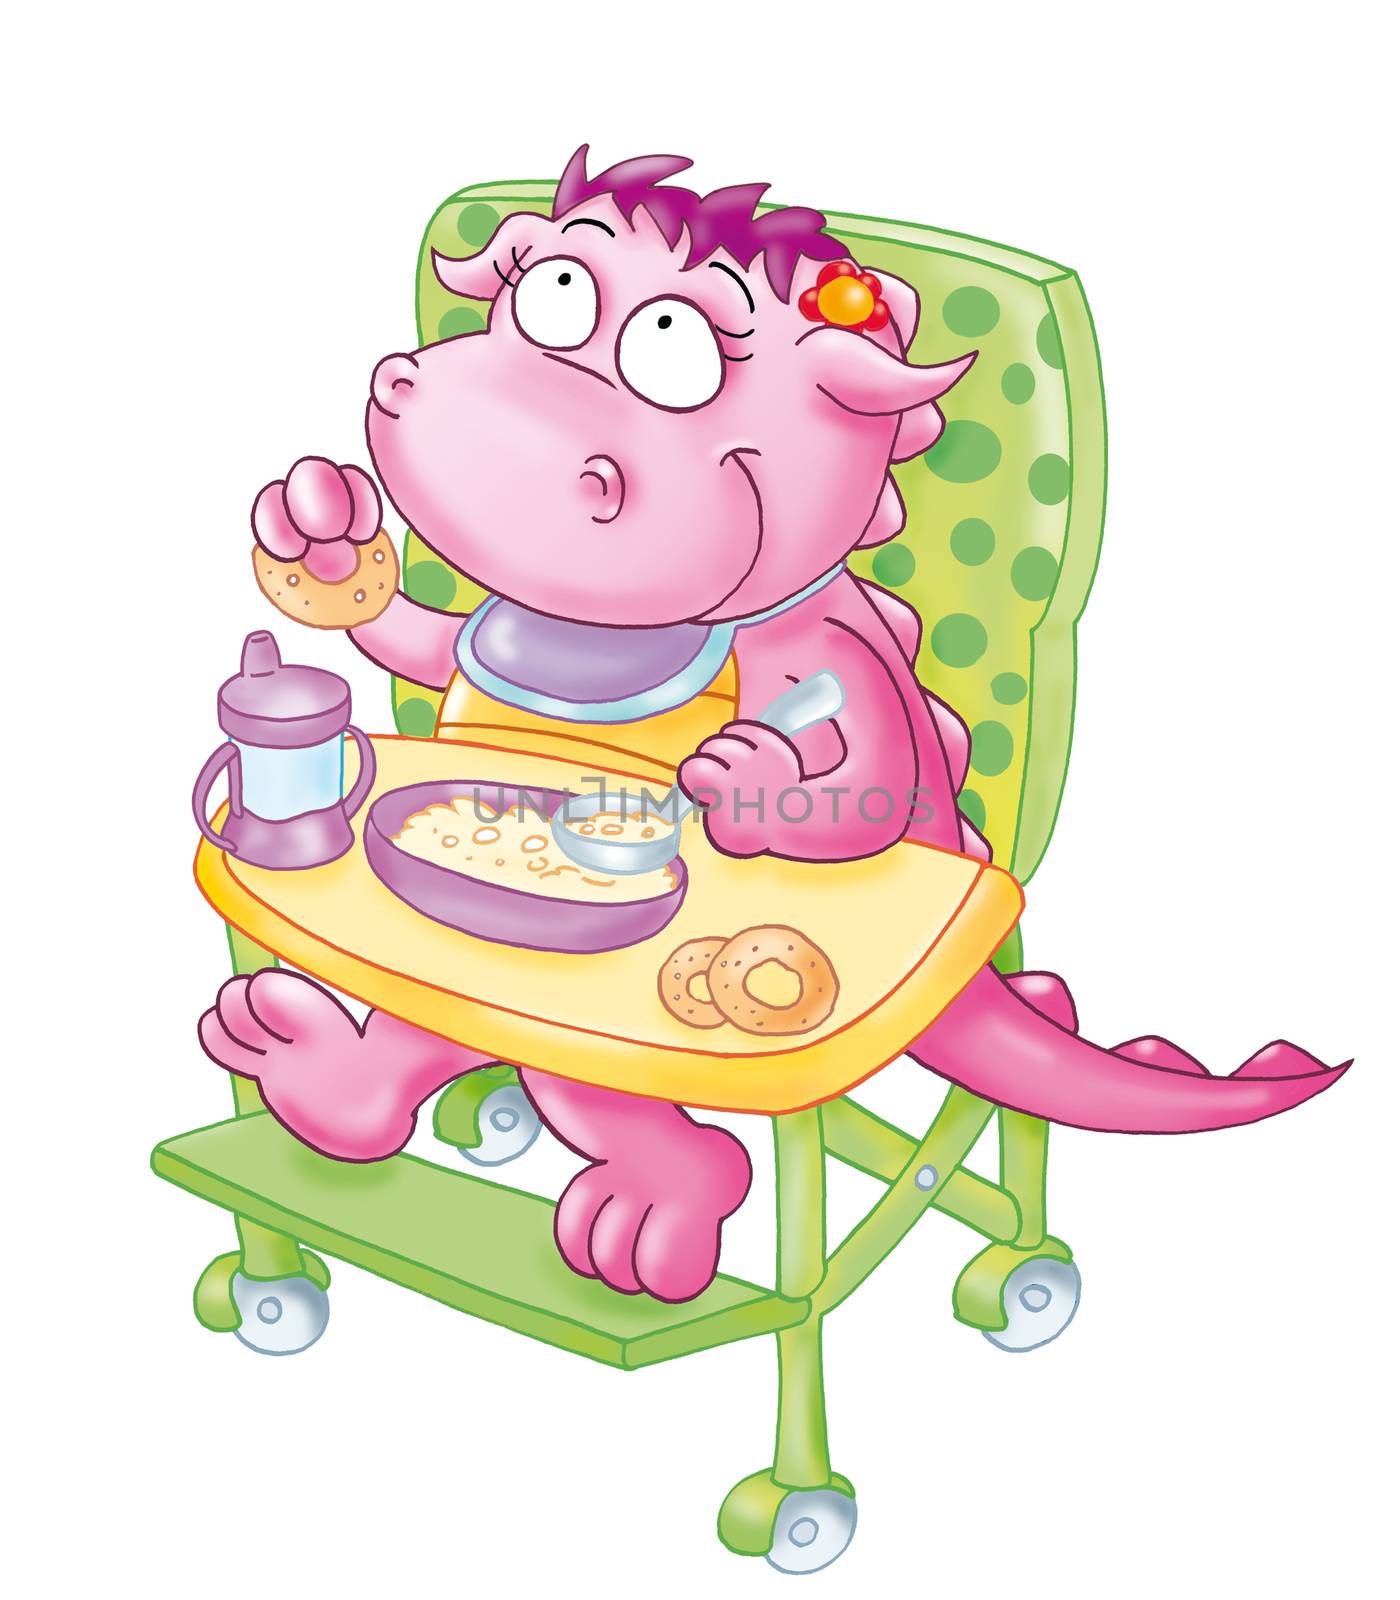 The little dragon eats, the baby is highchair